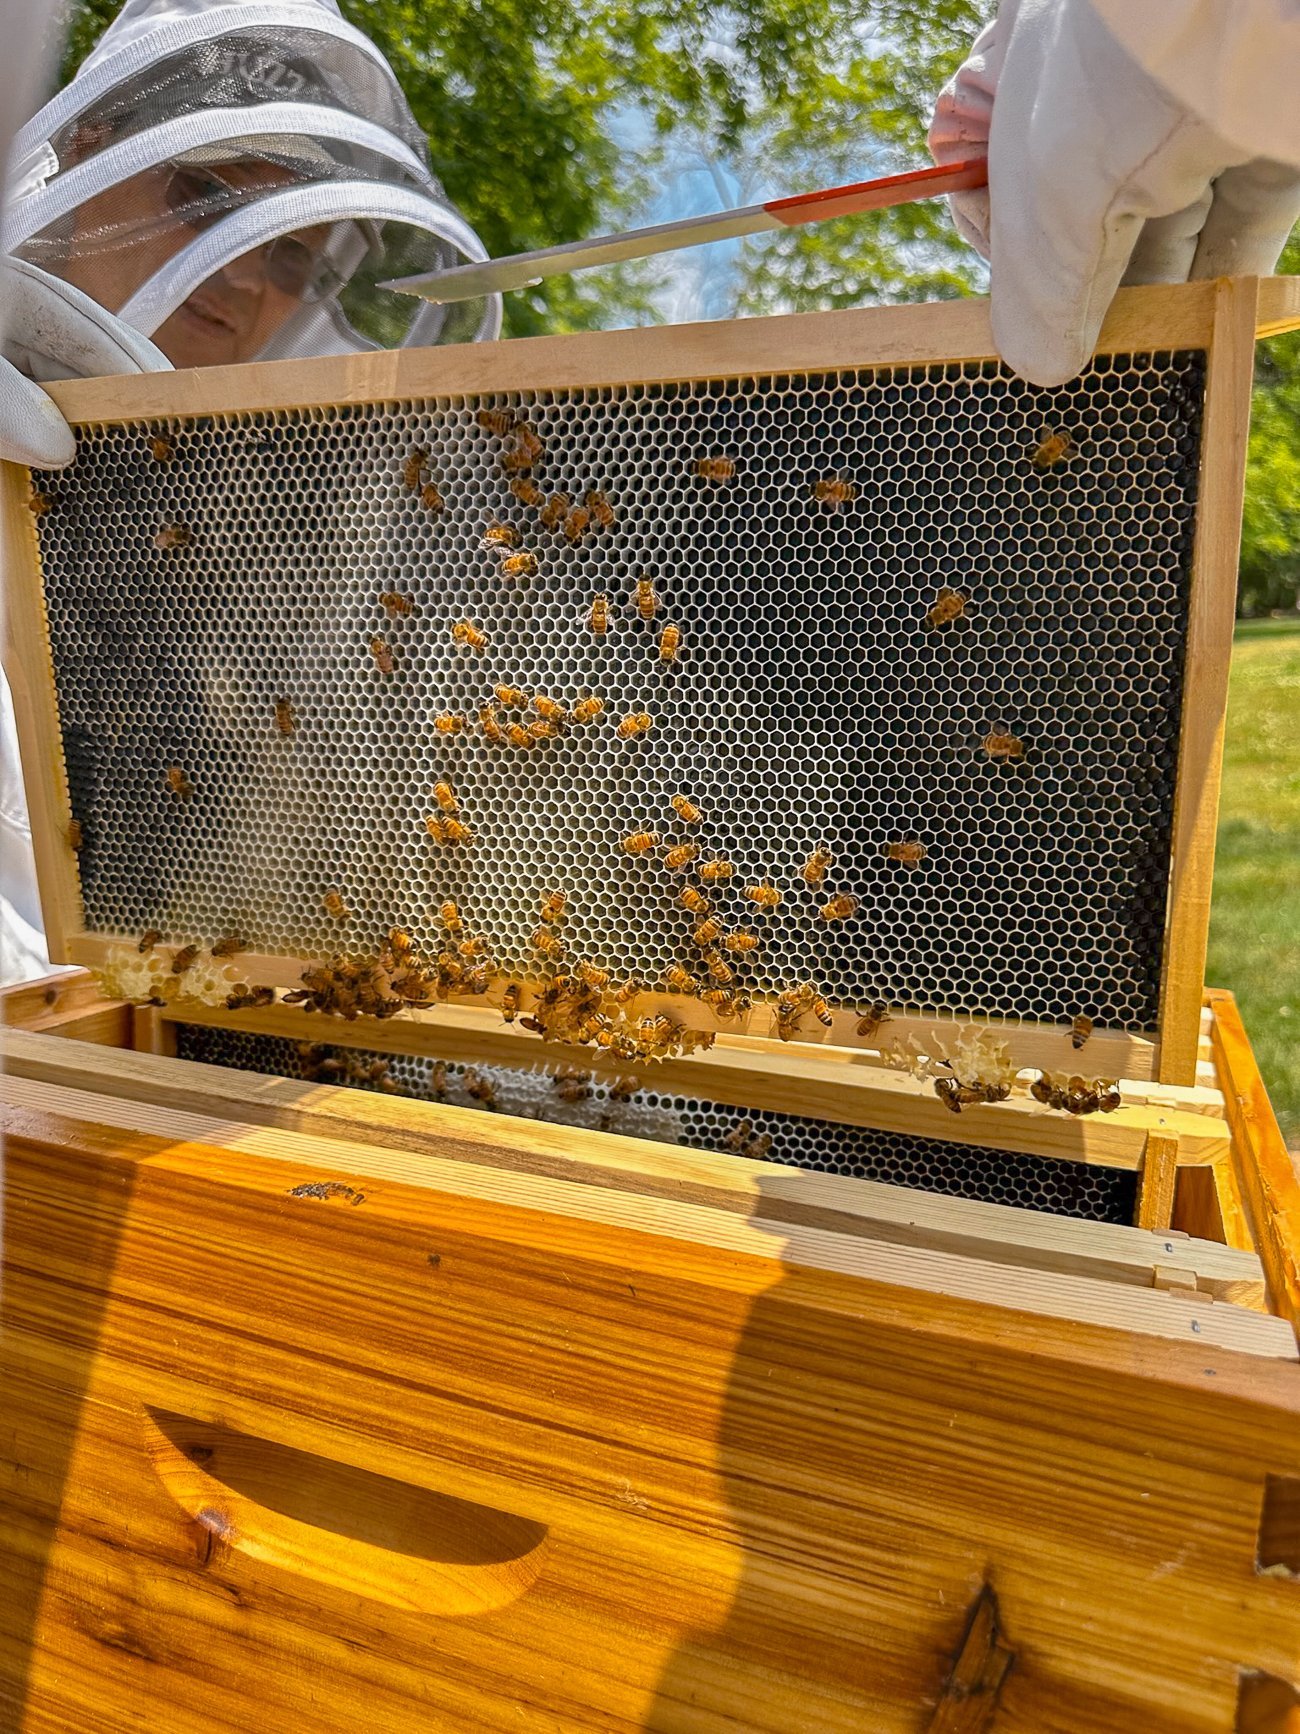 bees on frame